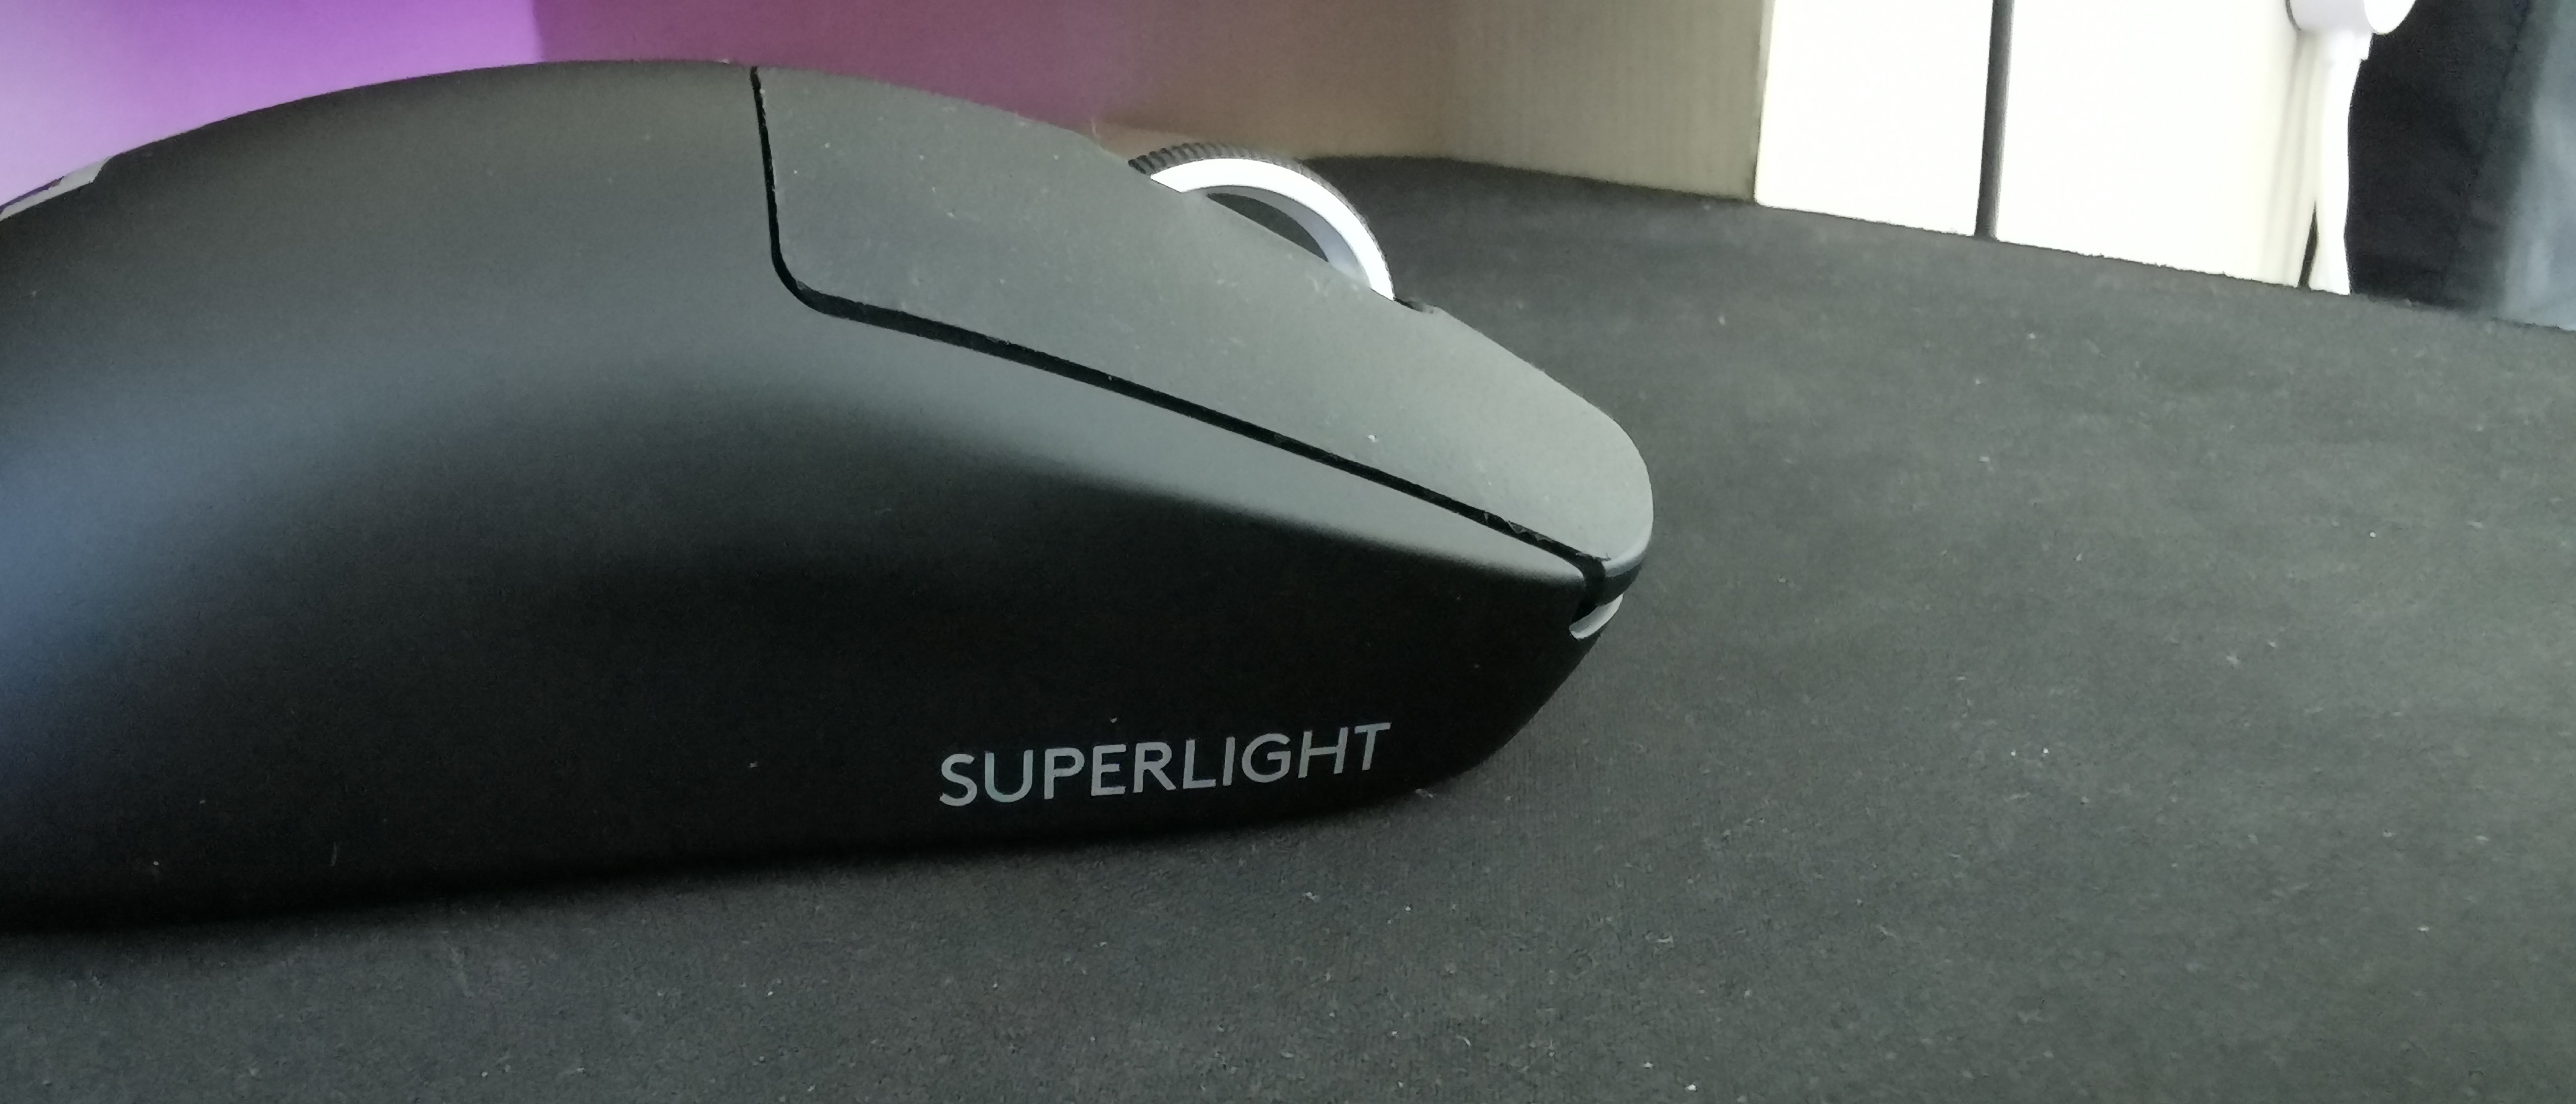 Logitech's G Pro X Superlight is nearly the perfect mouse